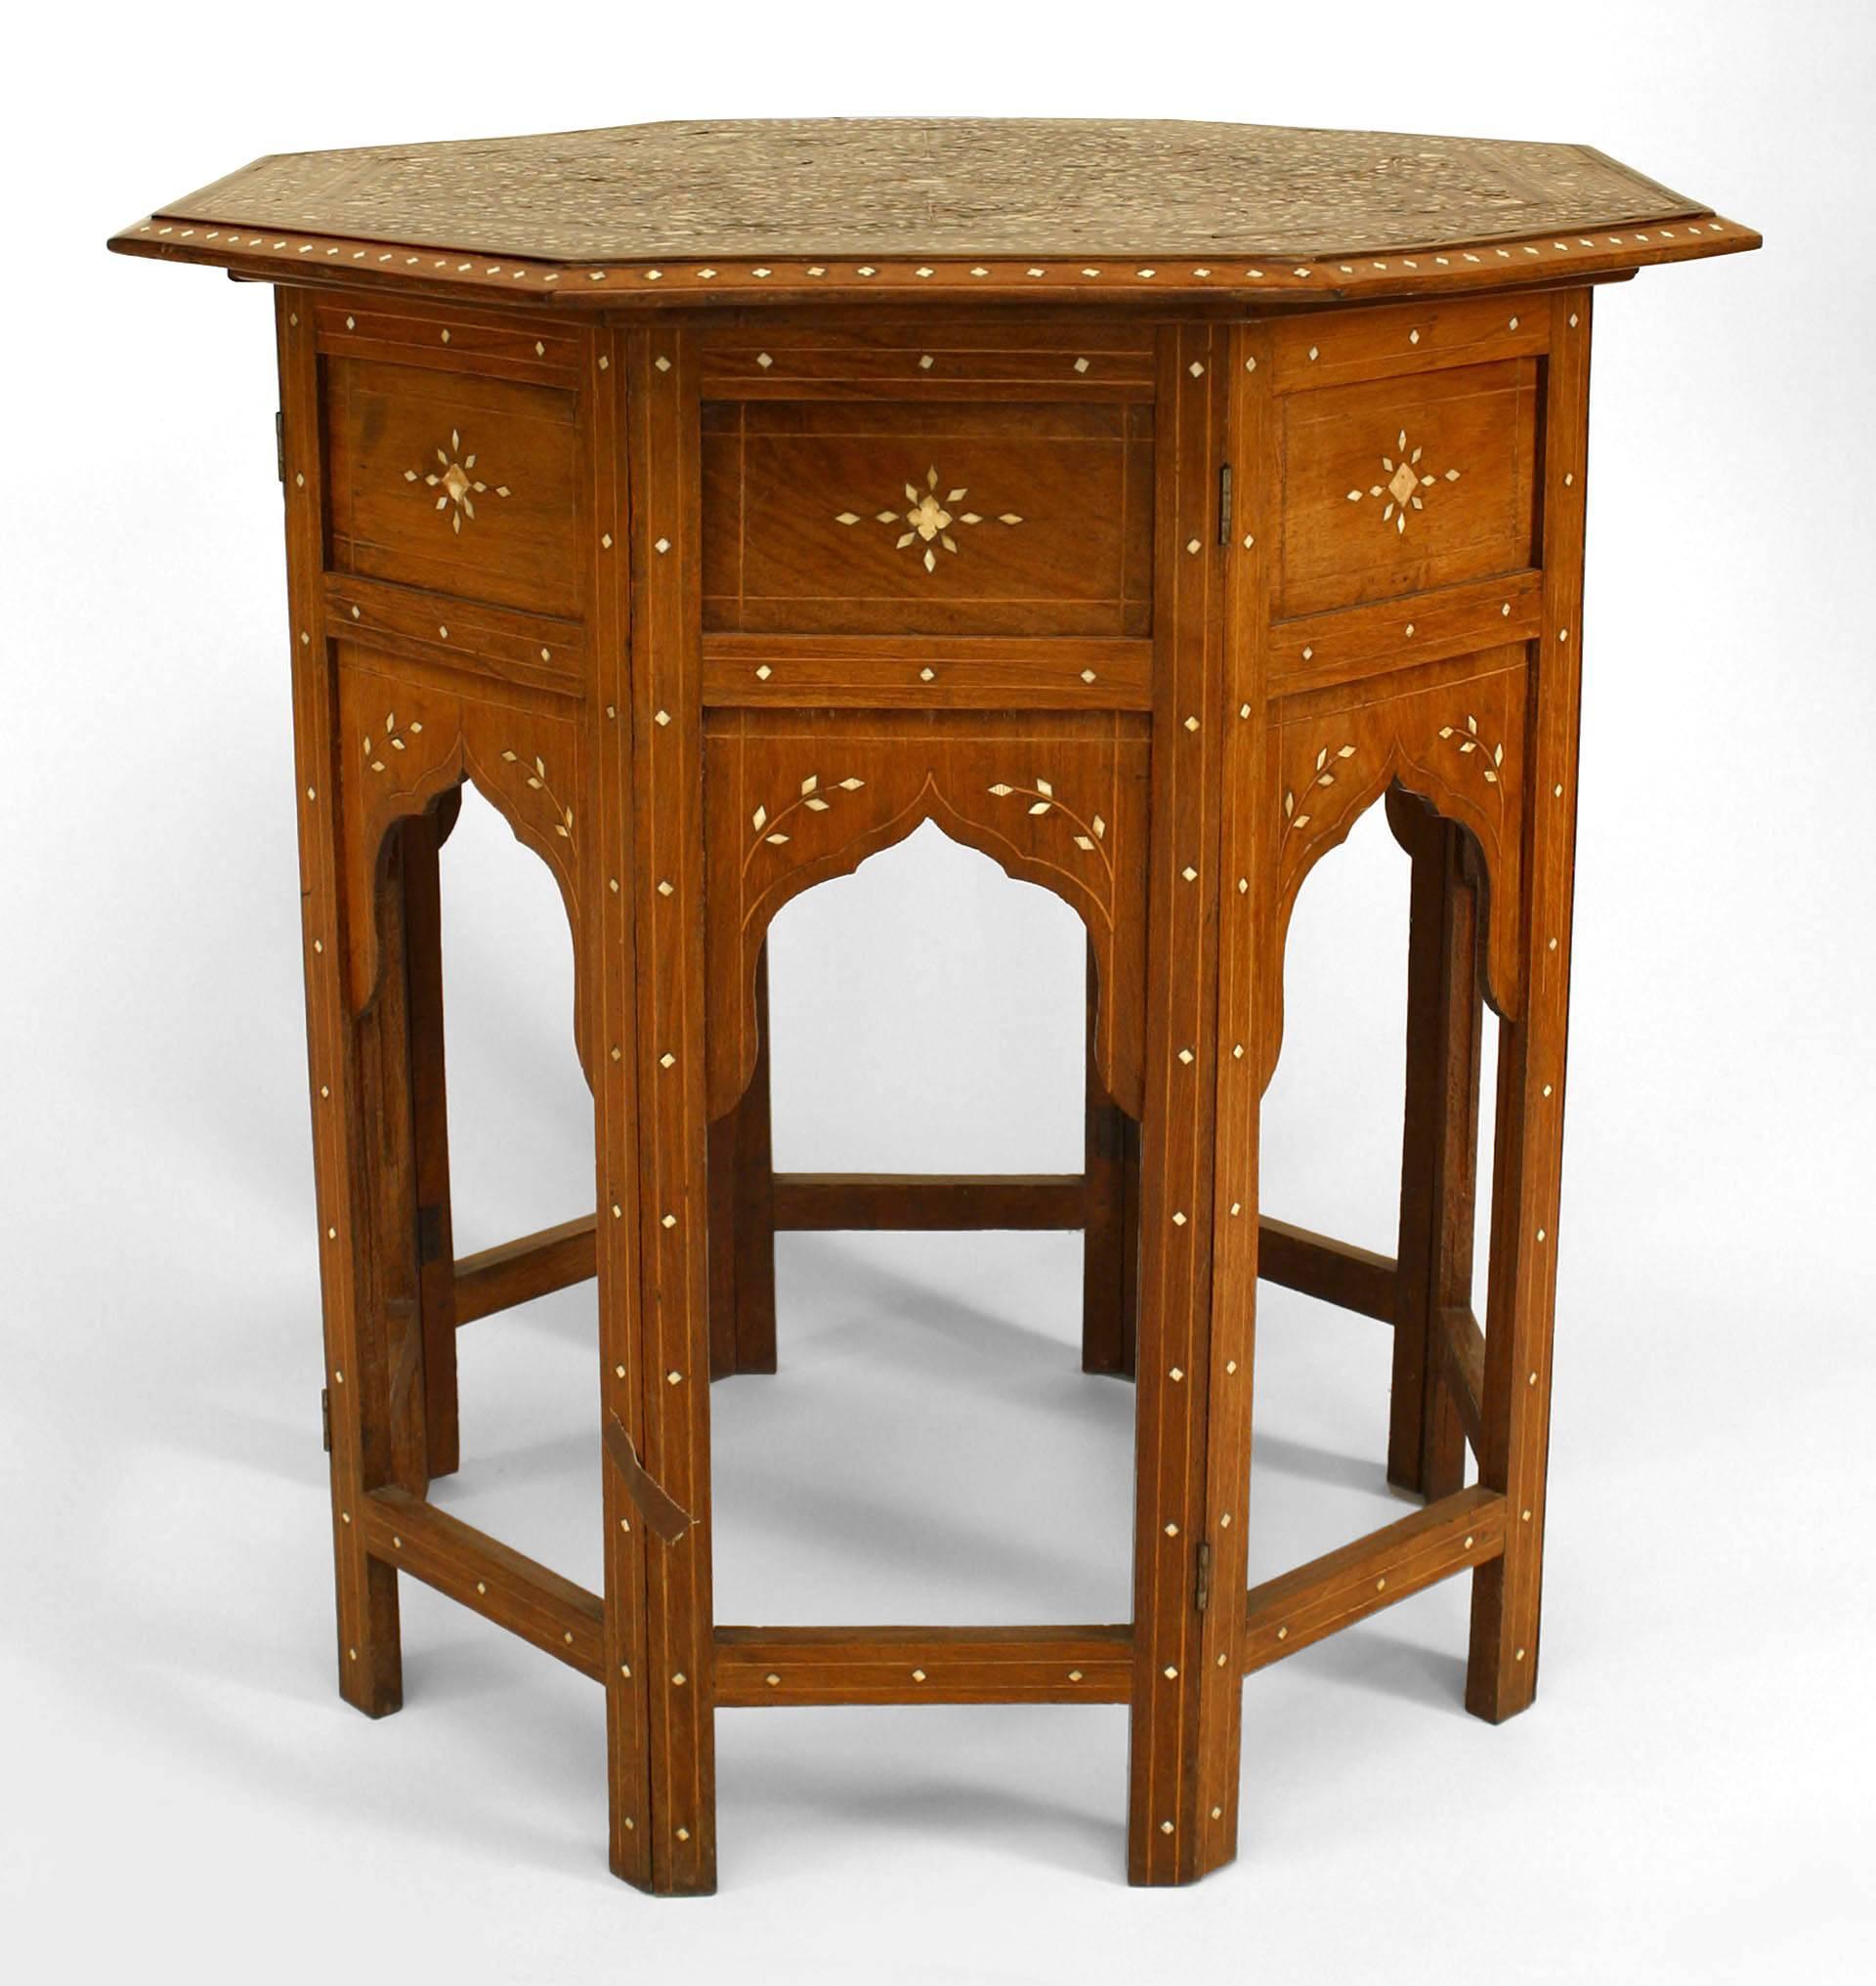 Middle Eastern Moorish-style (19th Century) teak and bone inlaid octagonal taboret / end table with open arch design panels at base.
